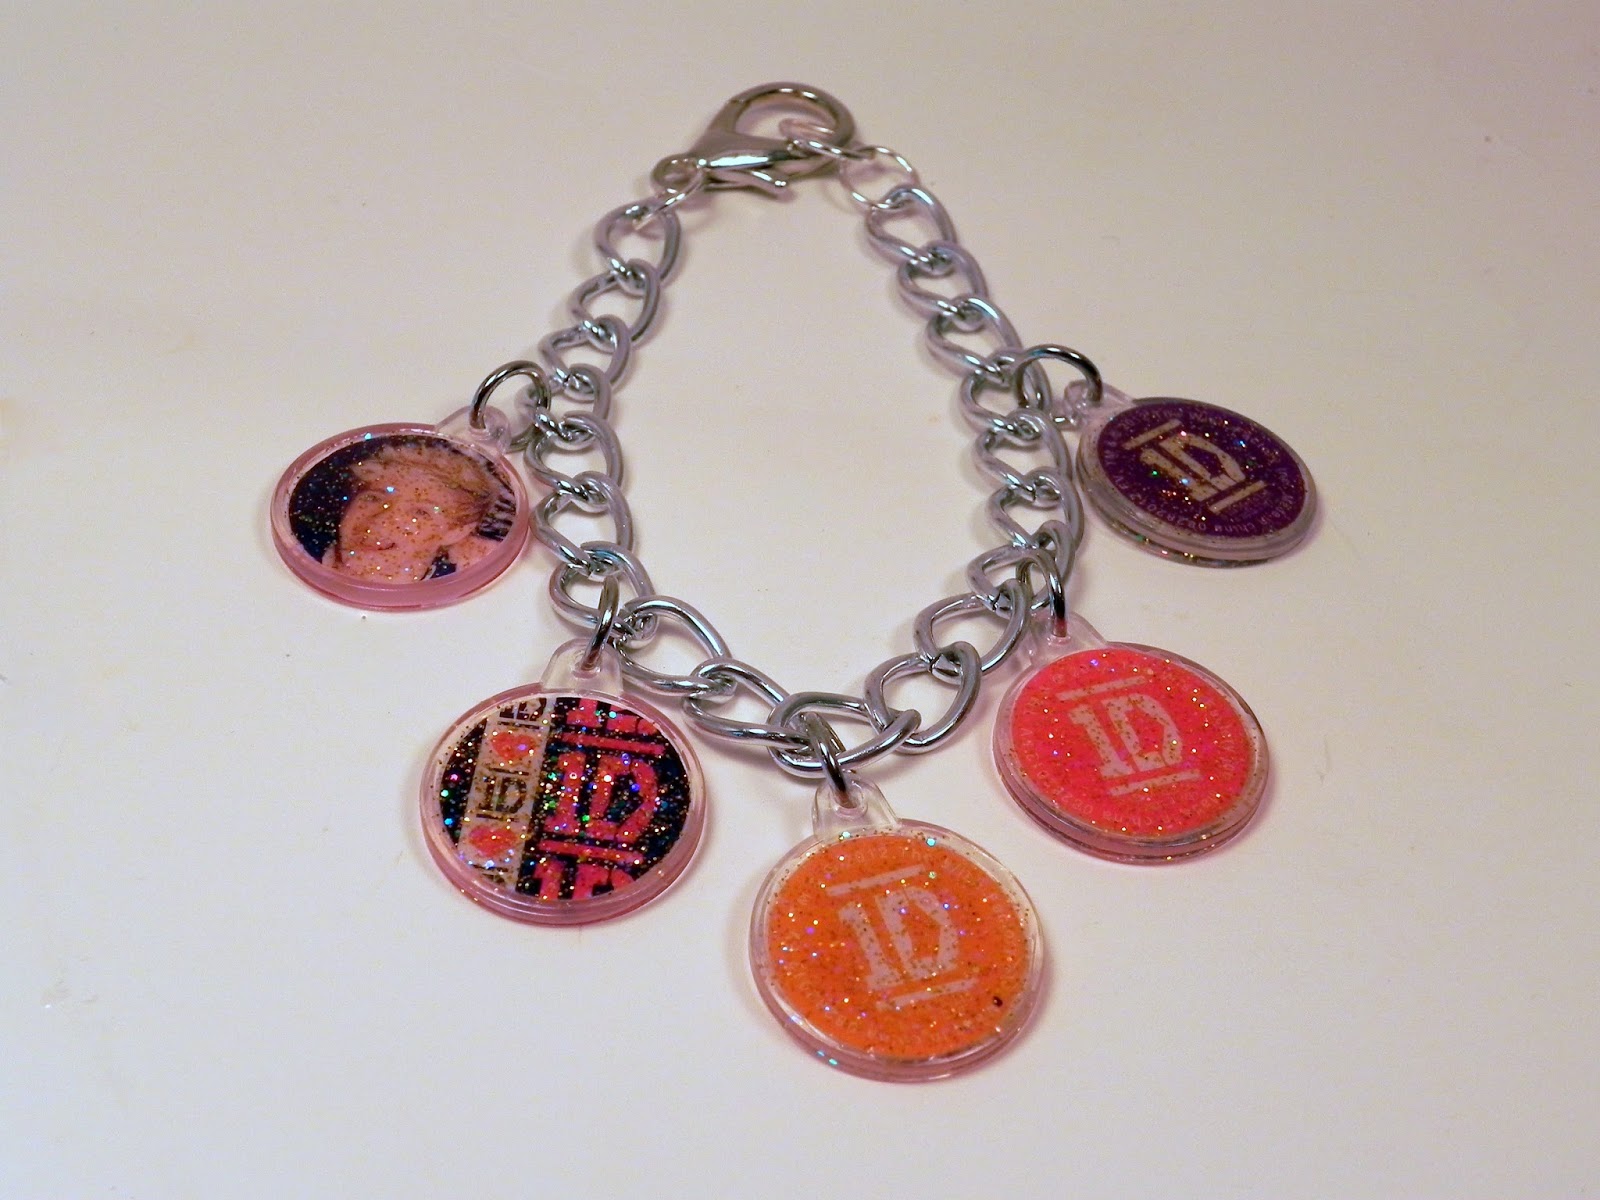 one direction charm bracelet products for sale